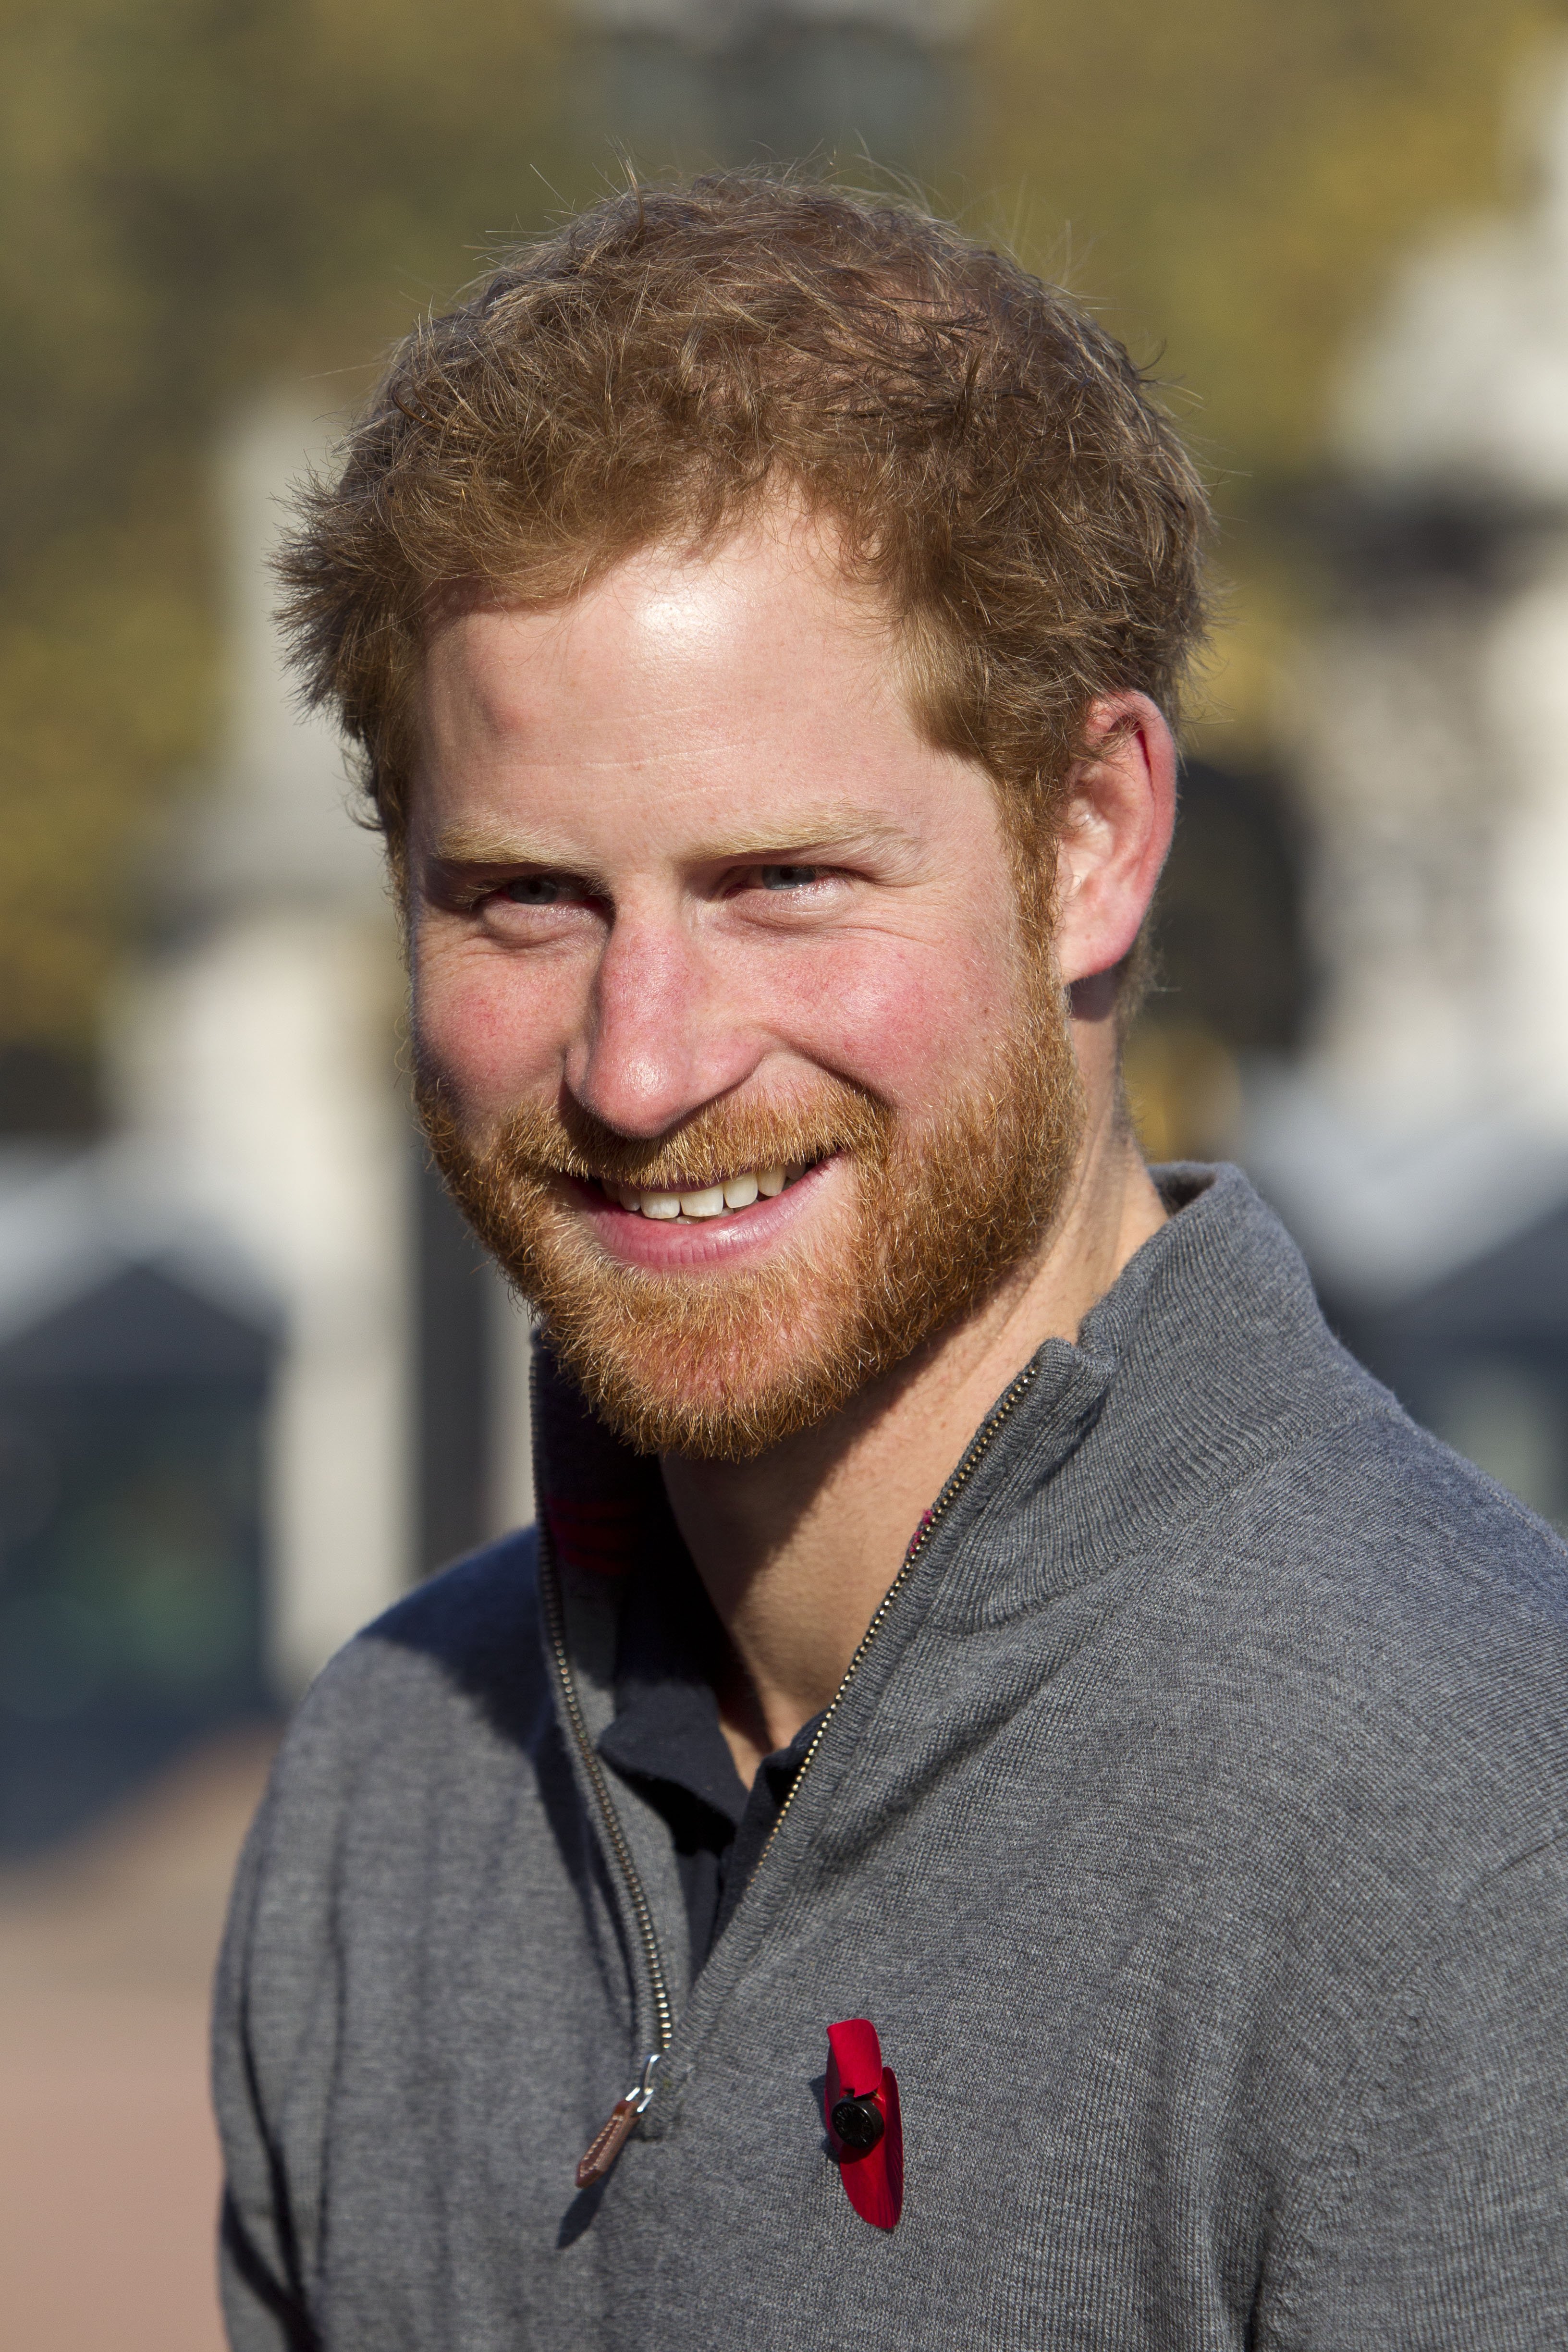 Prince Harry at the forecourt of Buckingham Palace on November 1, 2015 in London, England | Source: Getty Images